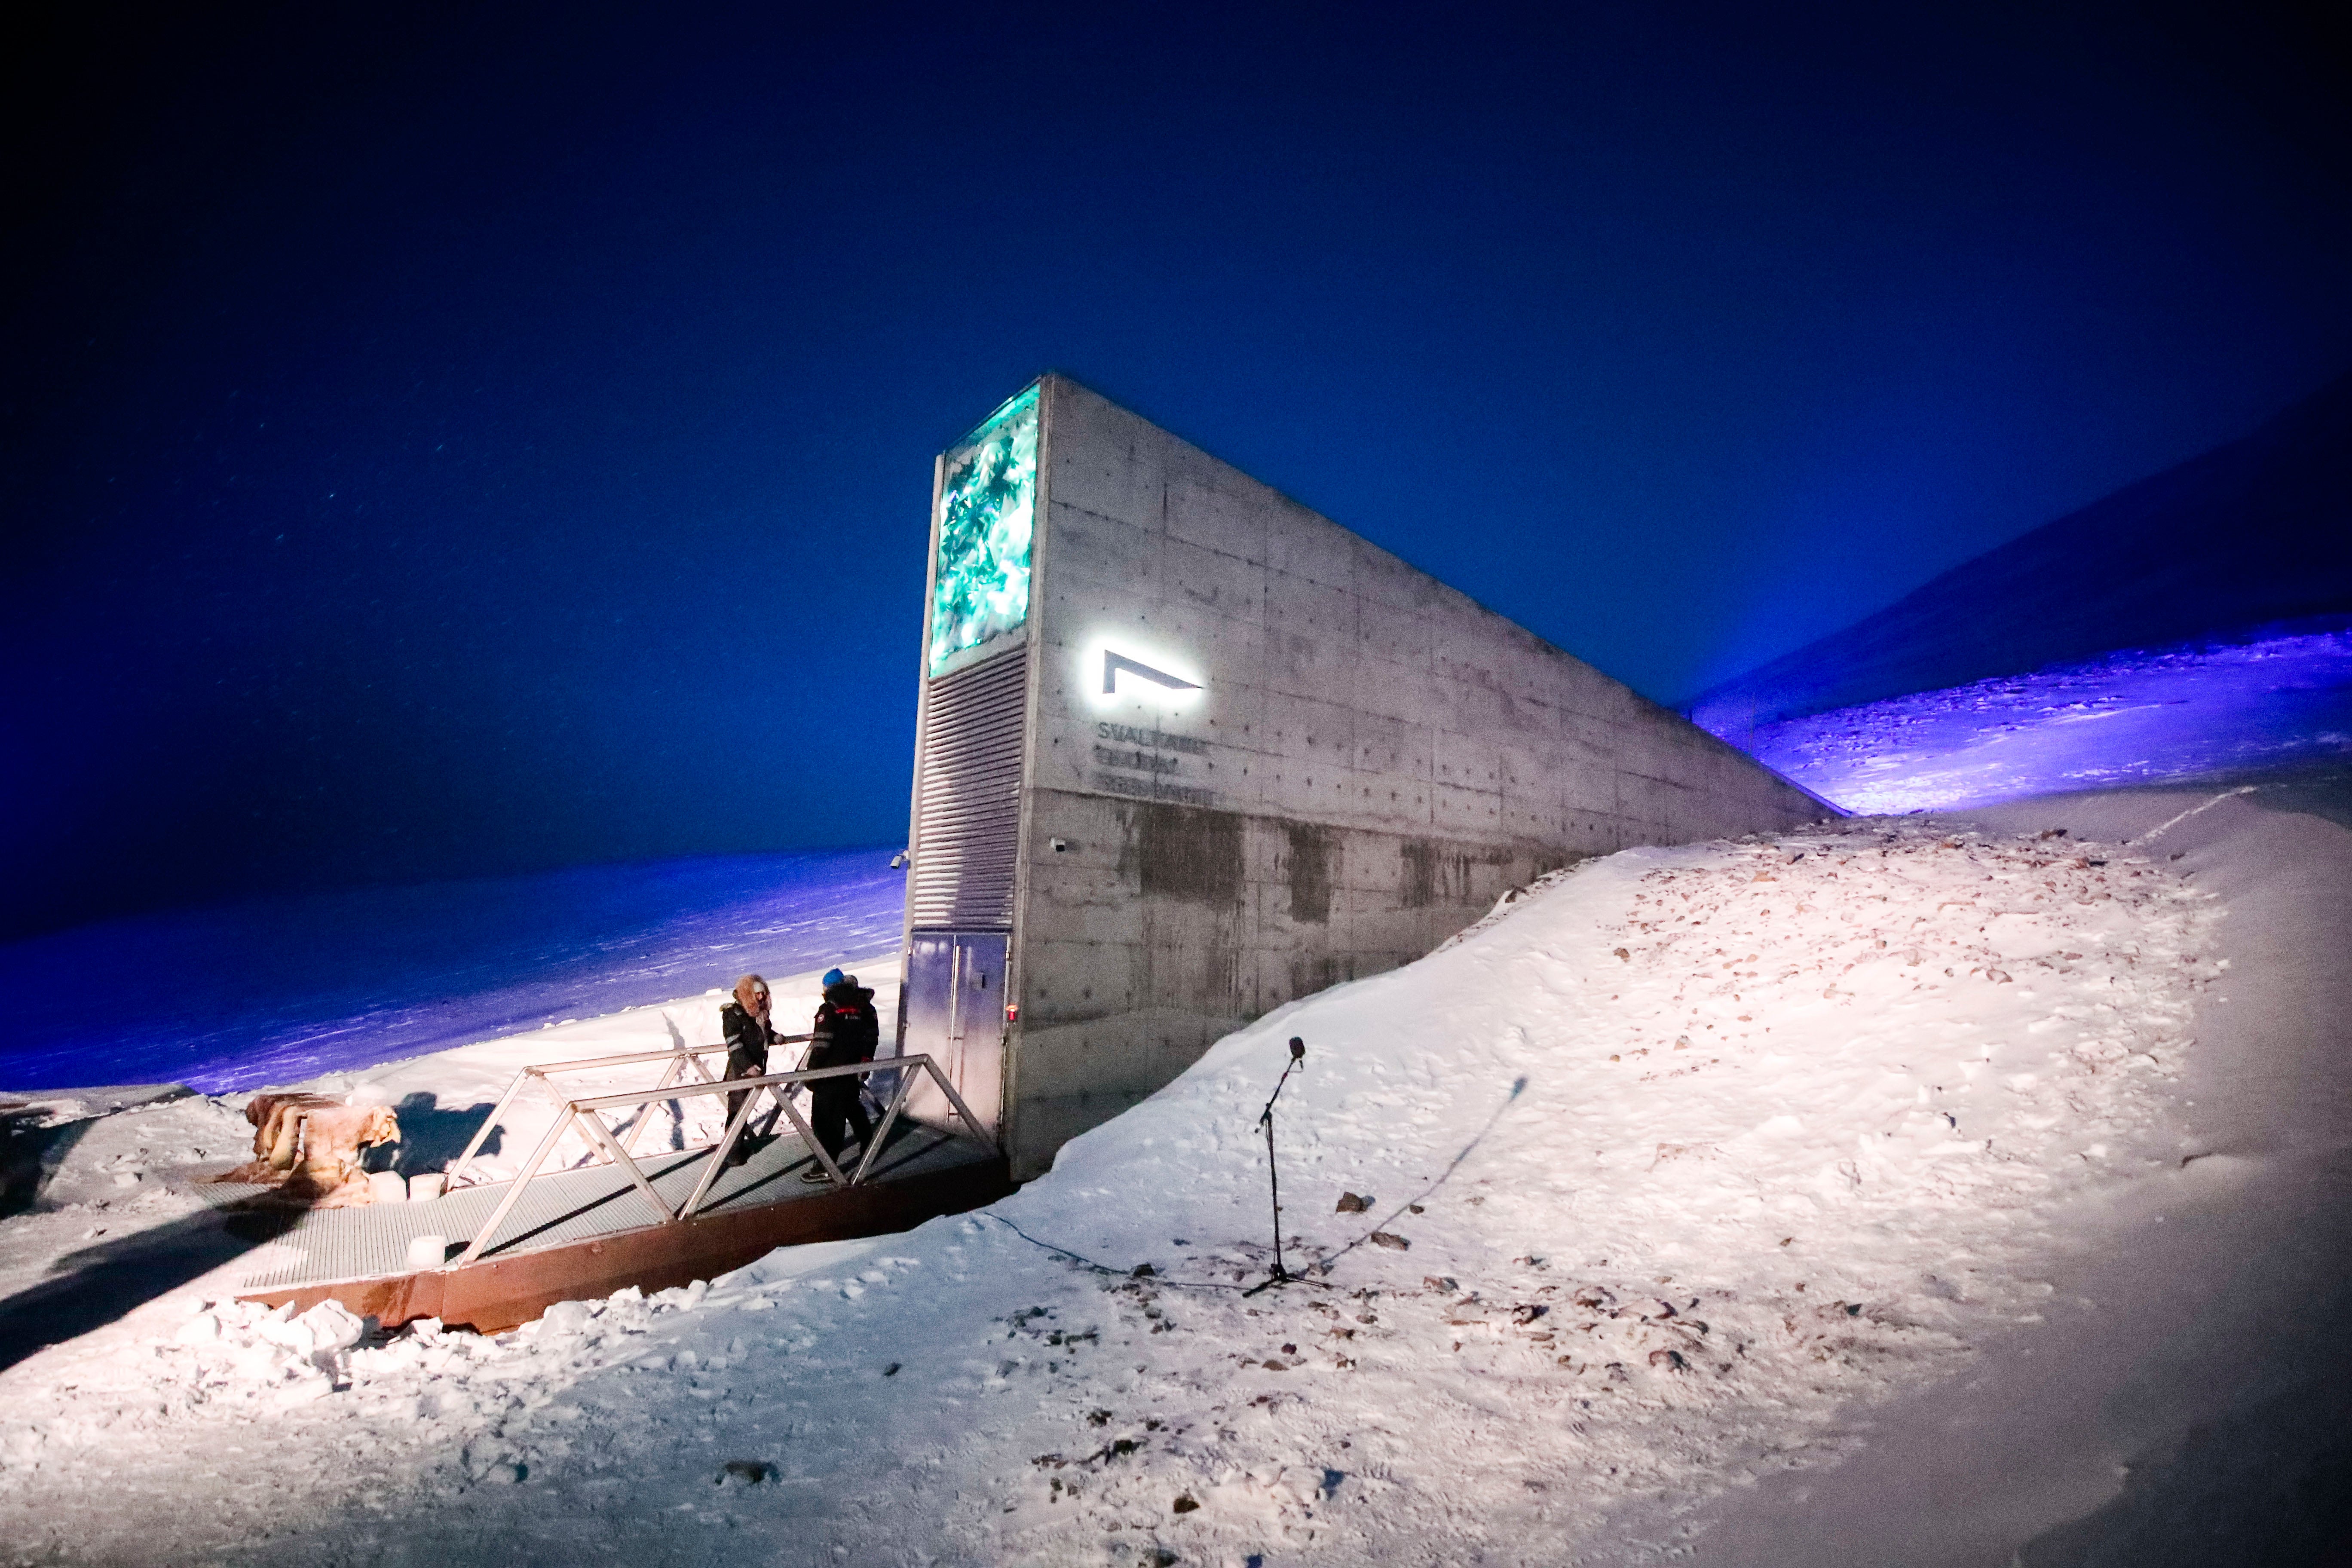 People stand in front of the entrance to the international gene bank Svalbard Global Seed Vault (SGSV)